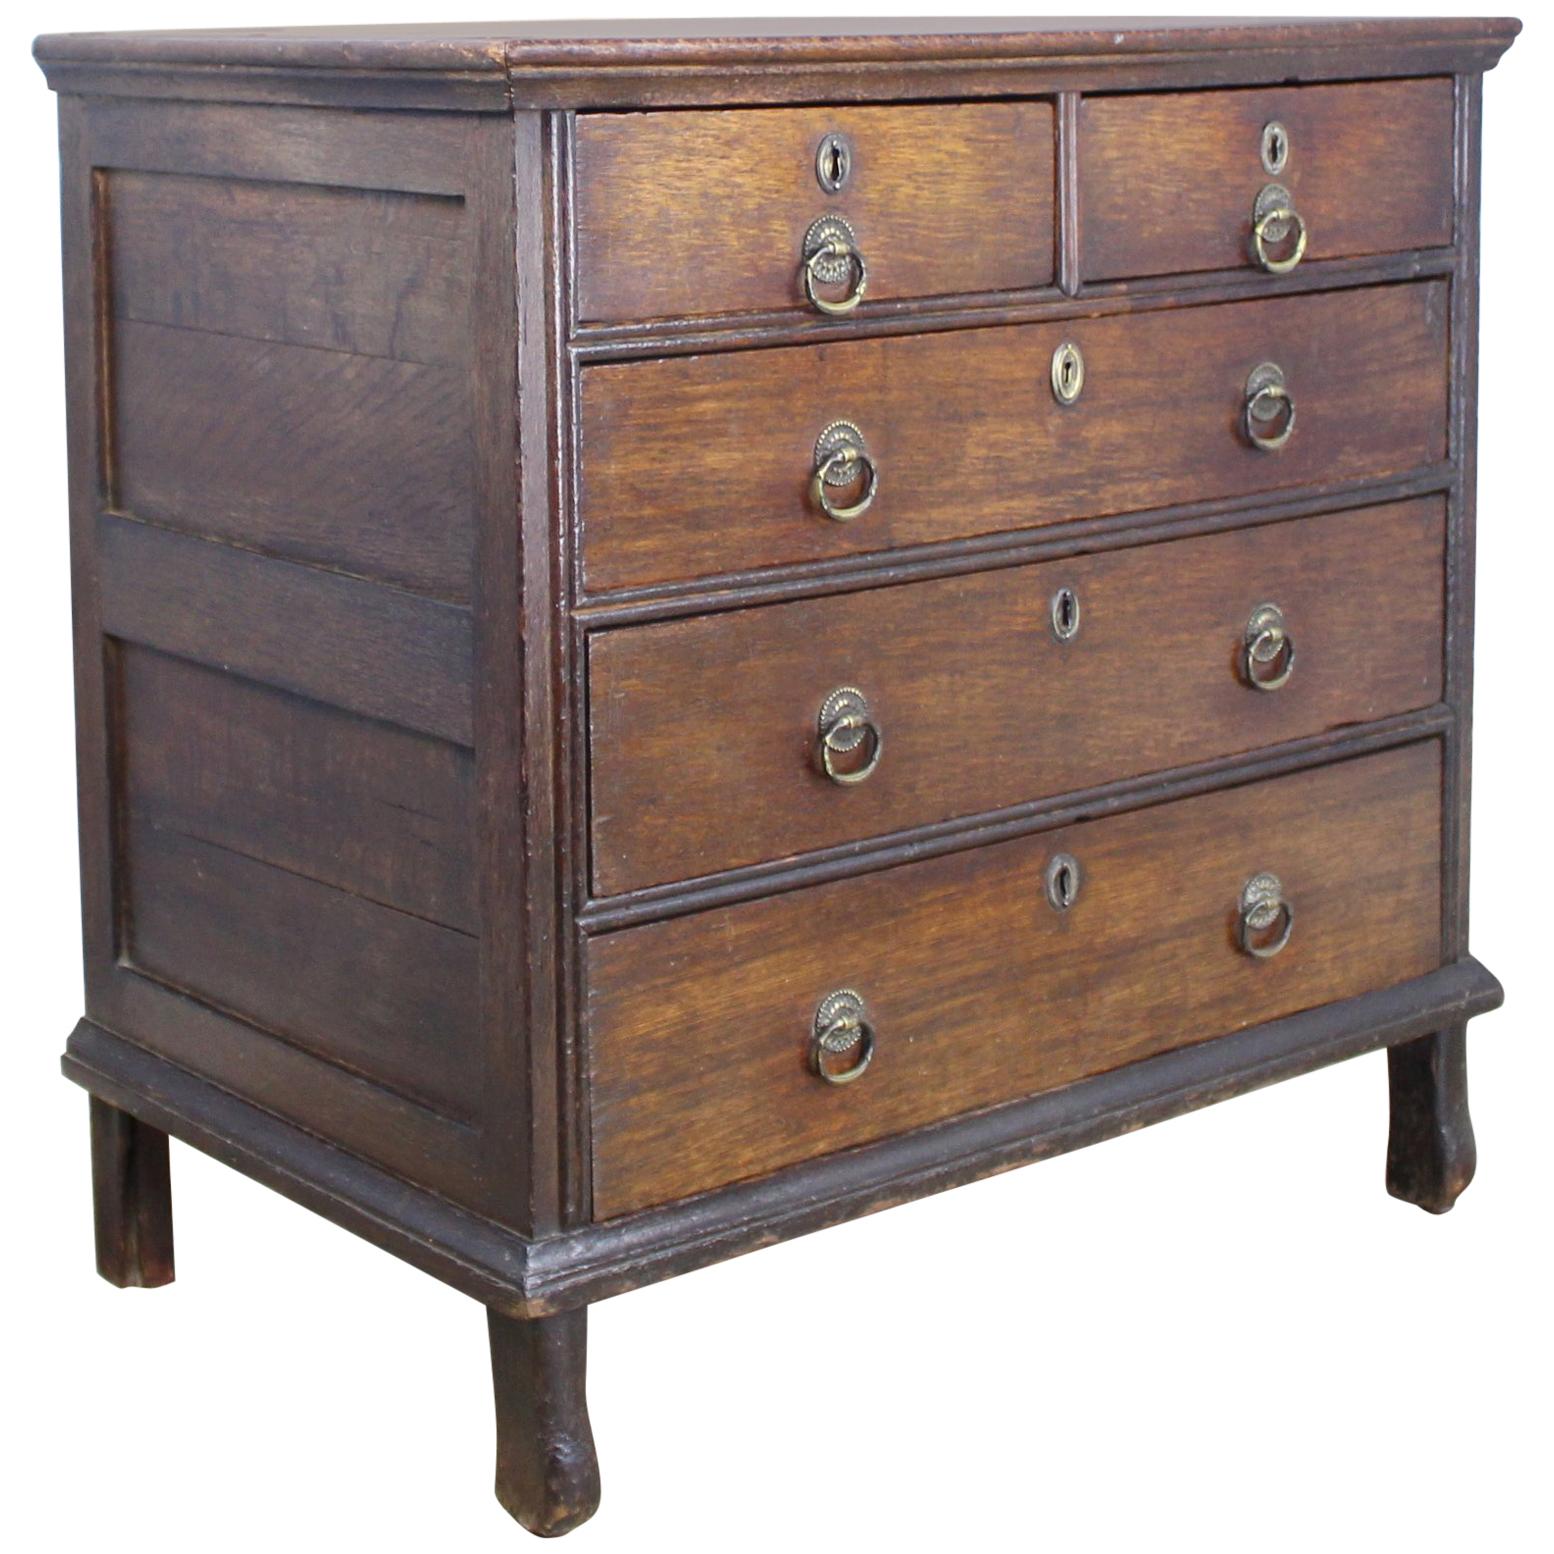 Very Early English Oak Chest of Drawers